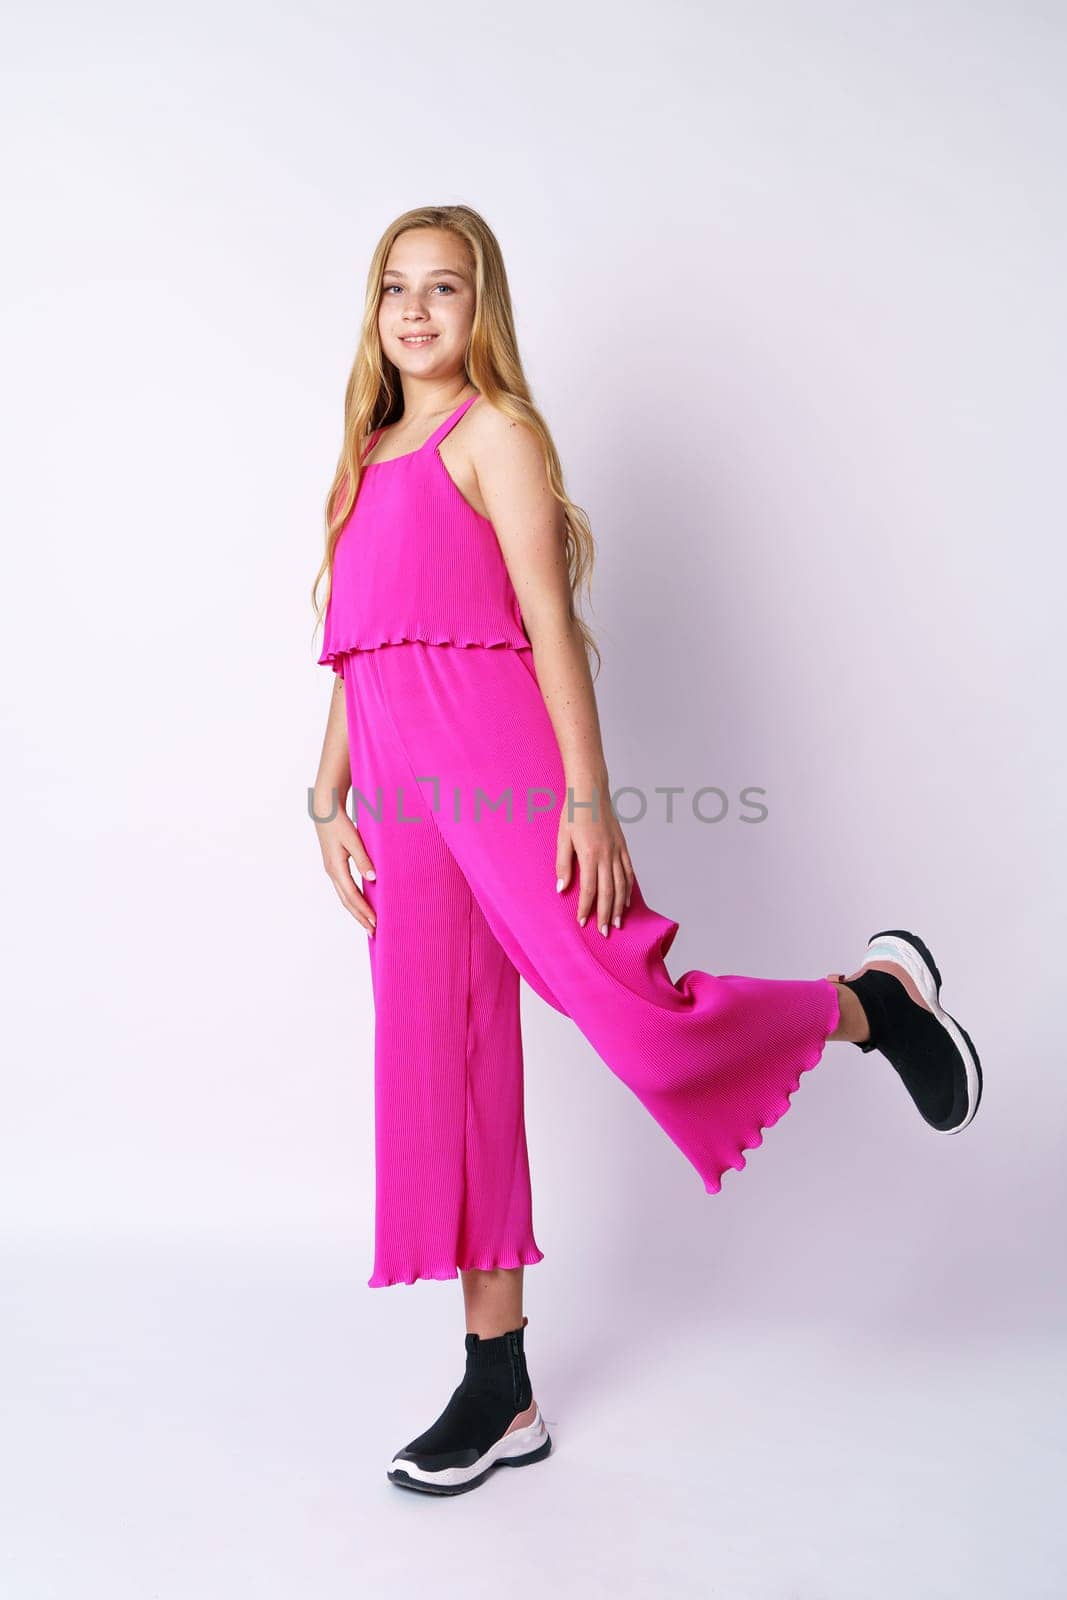 Beautiful girl teenager posing in a pink jumpsuit on a white background. Stylish and youthful bright clothes for a young professional fashion model